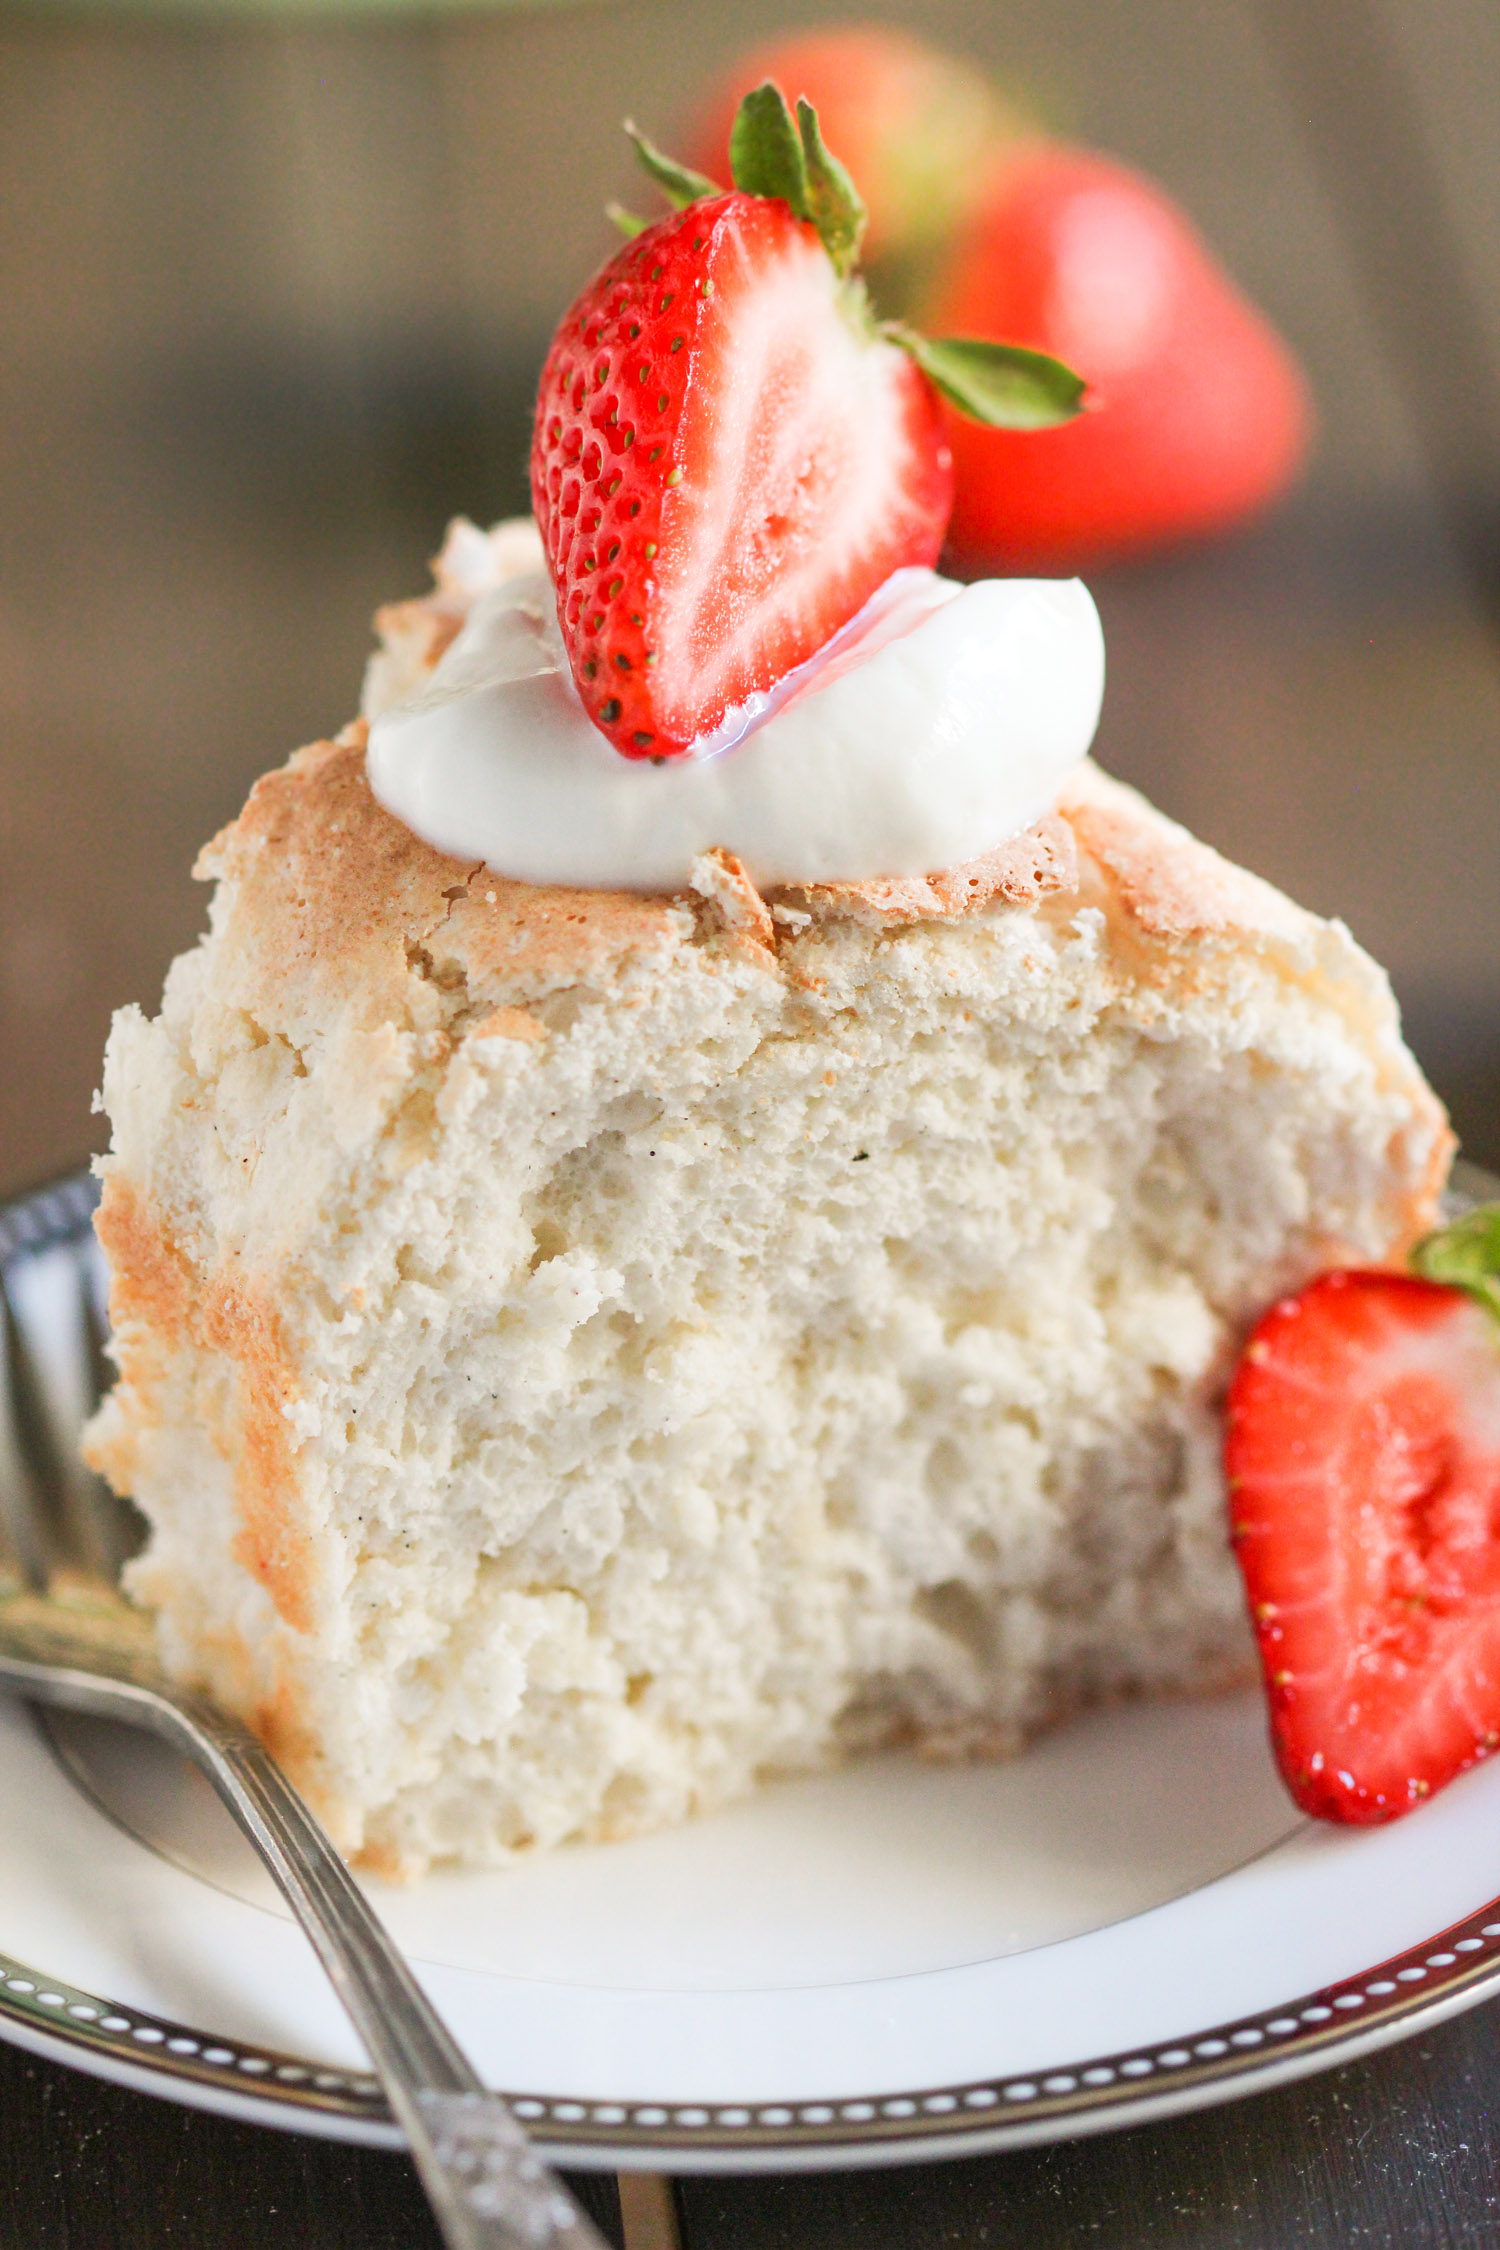 Healthy Angel Food Cake Recipe Only 95 calories, sugar